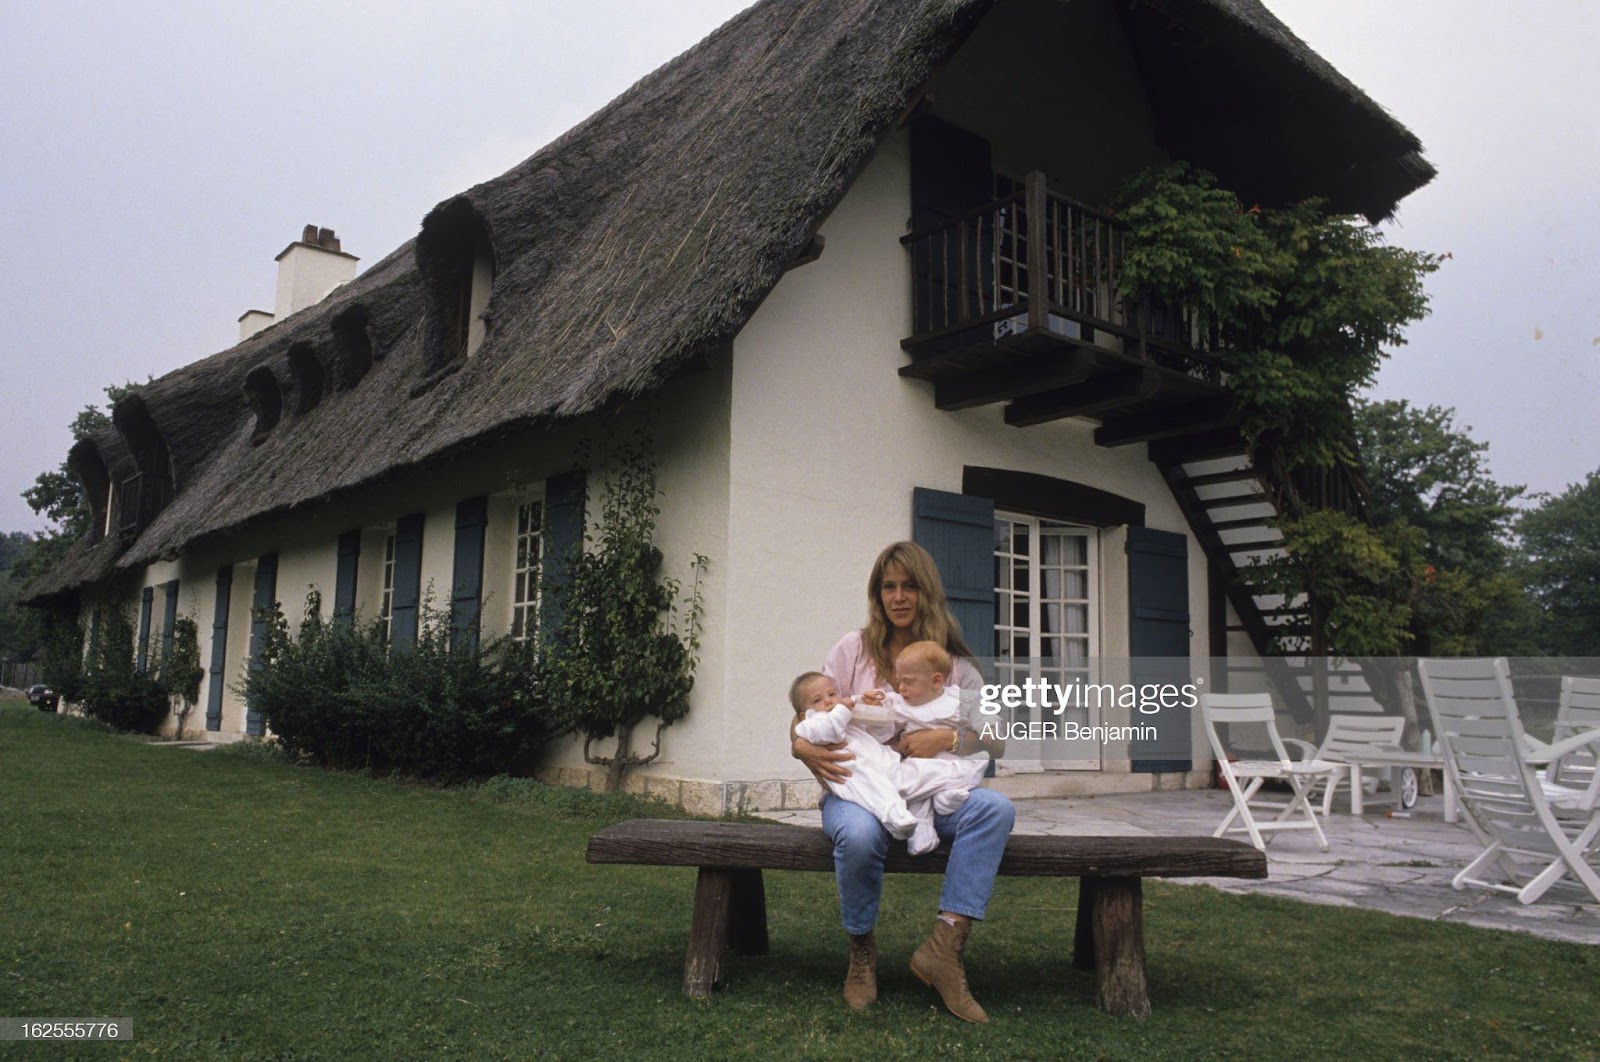 Catherine Pironi with her children in her property of Souvigny, France, on September 12, 1988, on the occasion of the release of a book on her deceased husband.